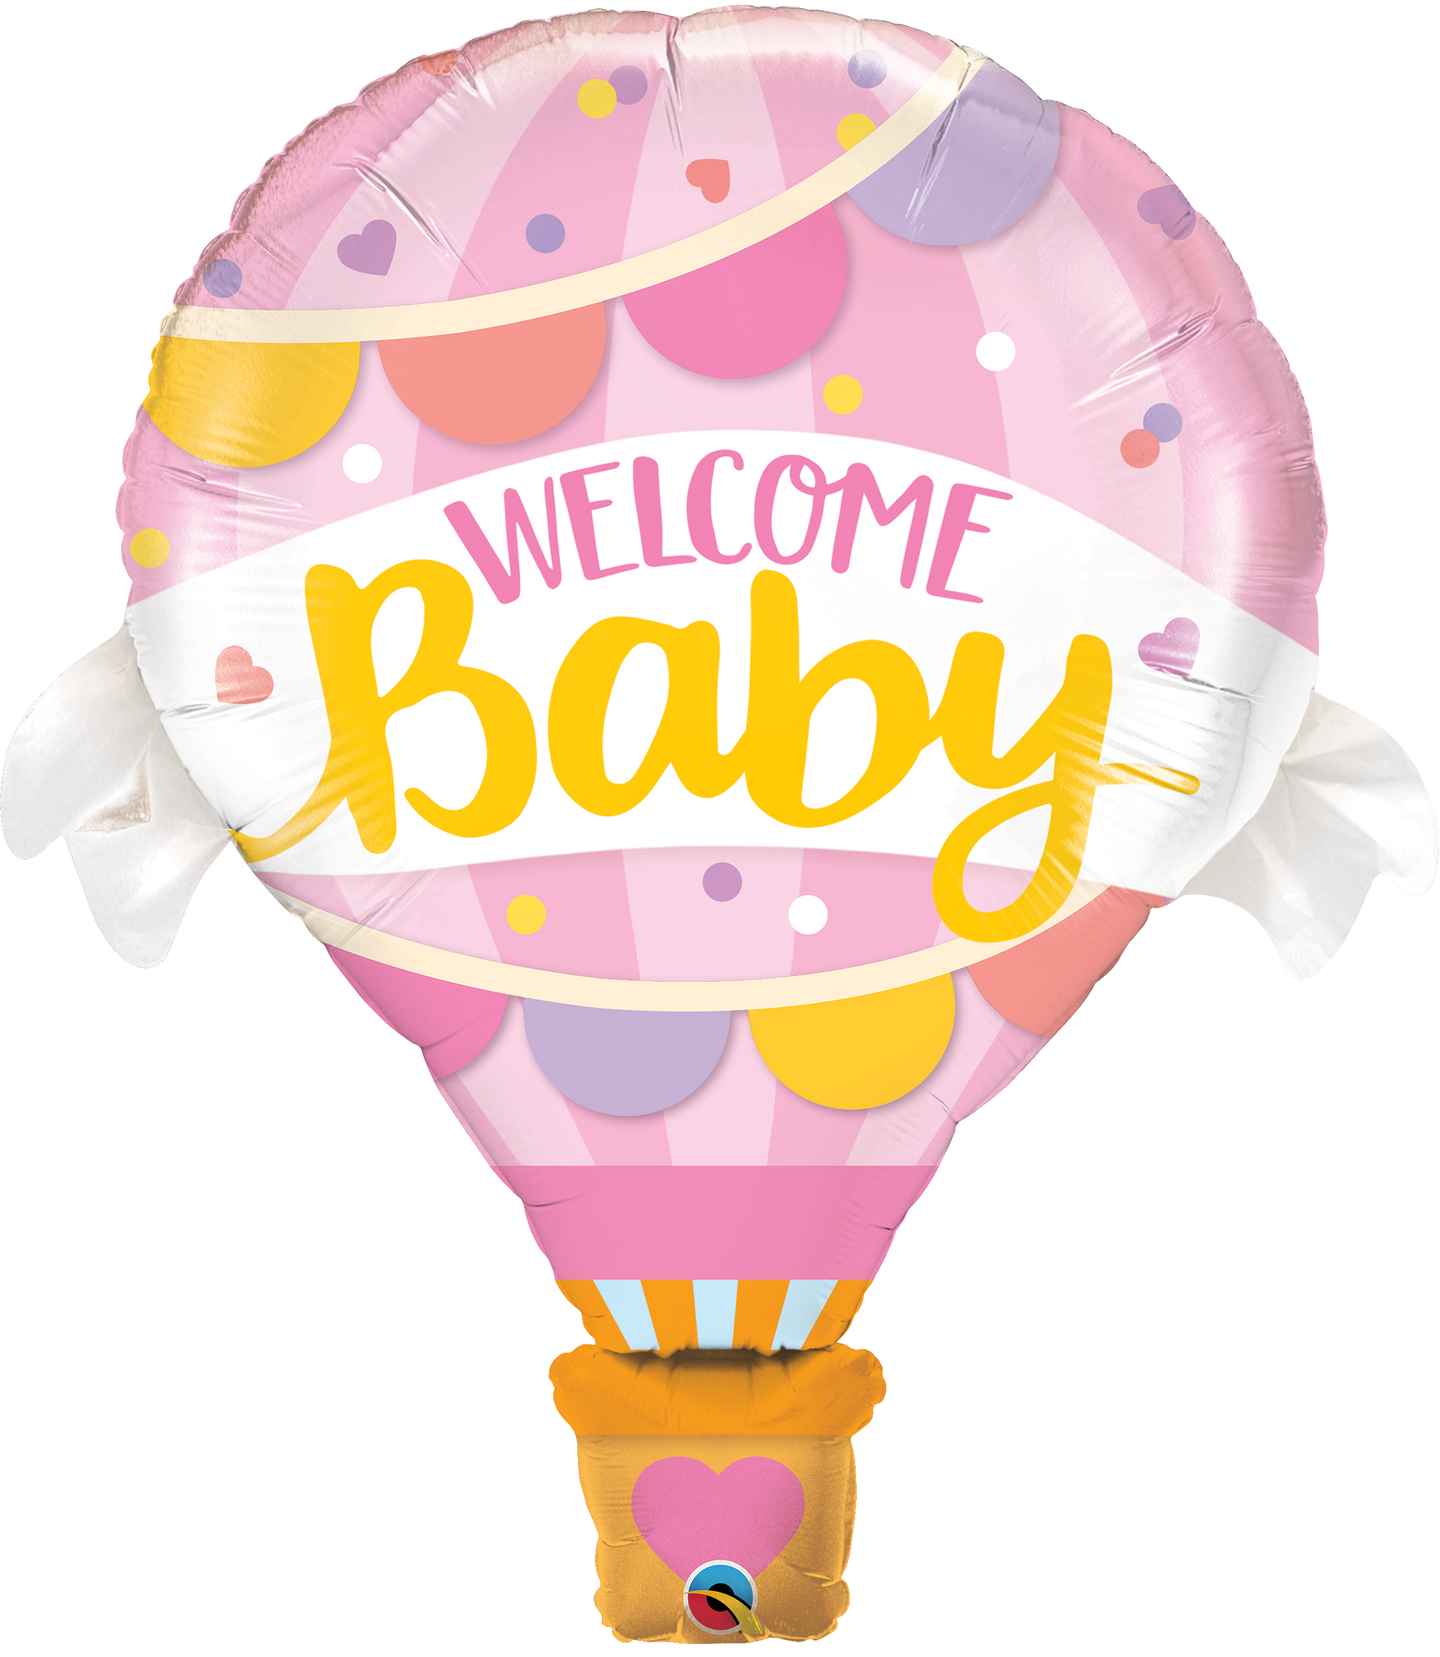 Welcome Baby Pink Balloon